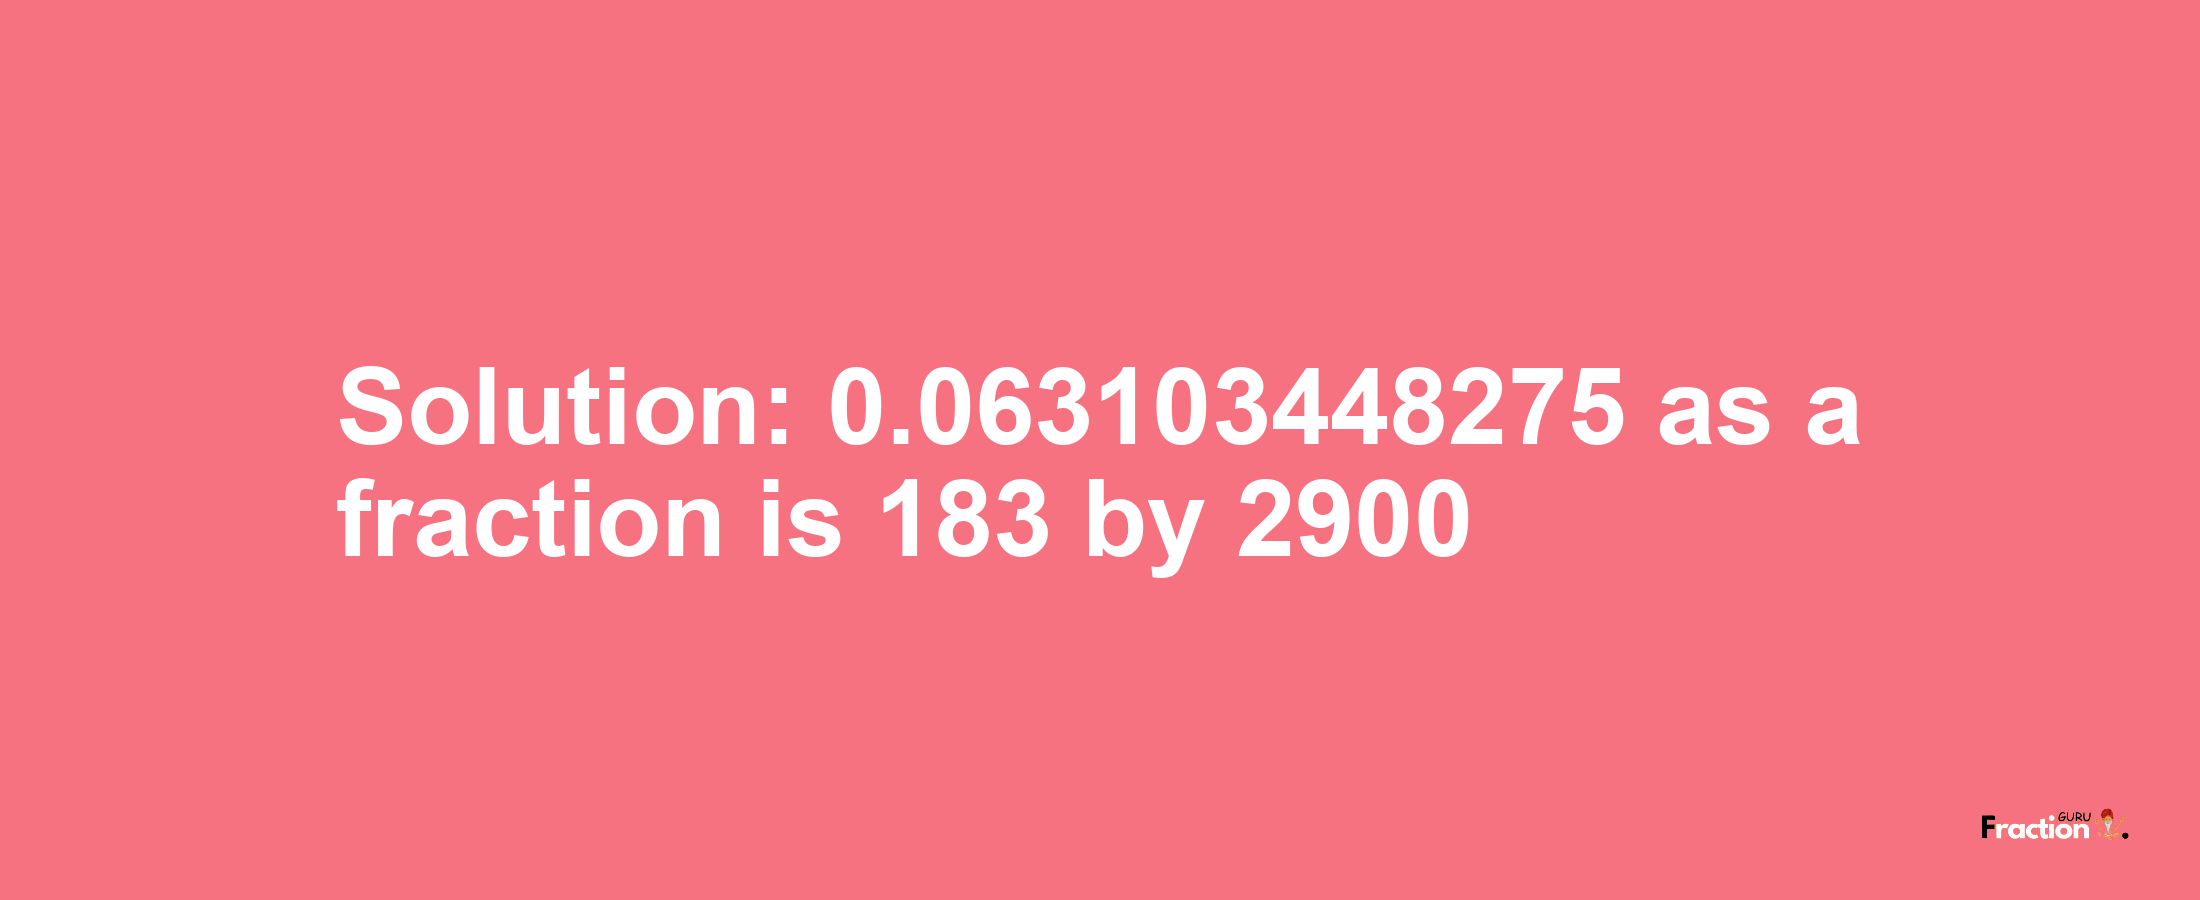 Solution:0.063103448275 as a fraction is 183/2900